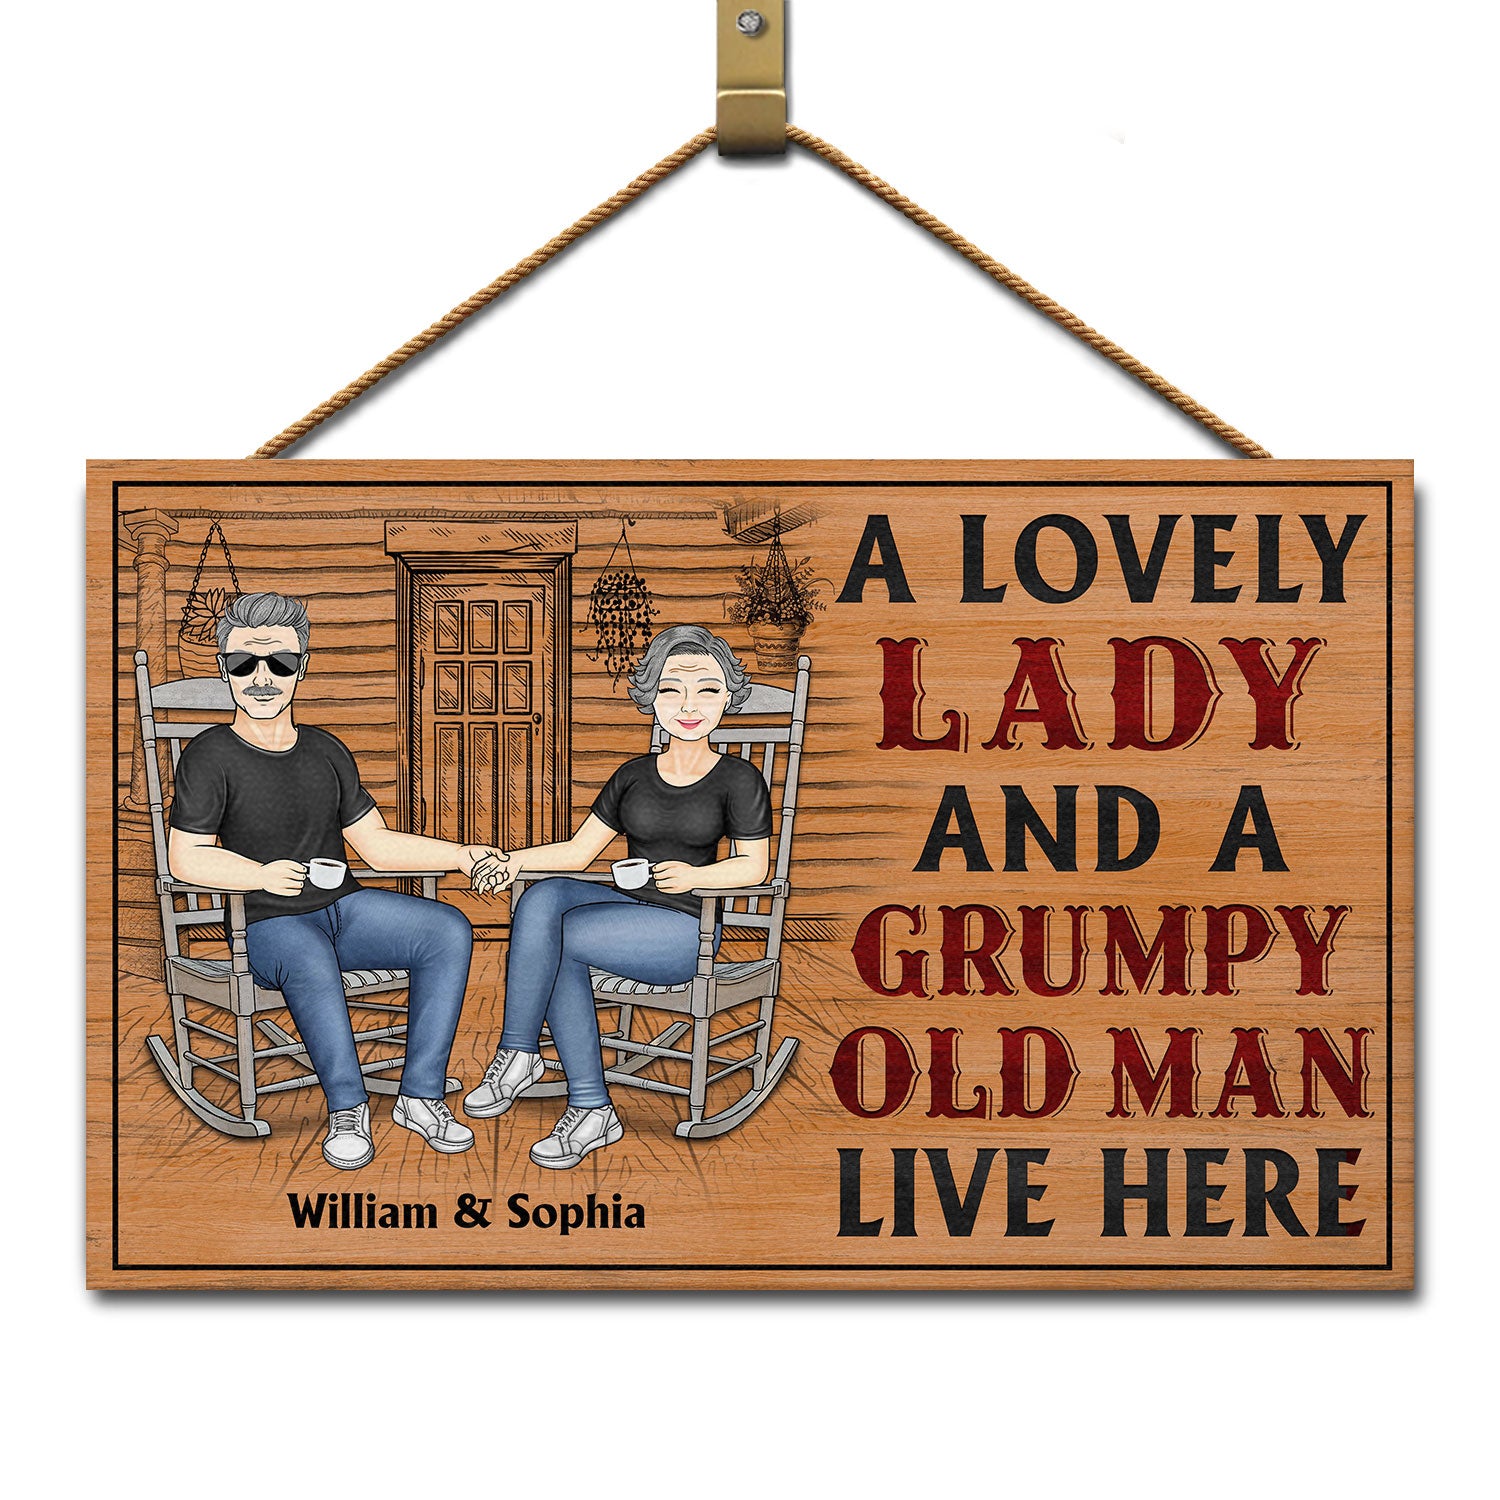 A Lovely Lady And A Grumpy Old Man Live Here - Anniversary, Birthday, Home Decor Gift For Spouse, Lover, Husband, Wife, Boyfriend, Girlfriend, Couple - Personalized Custom Wood Rectangle Sign